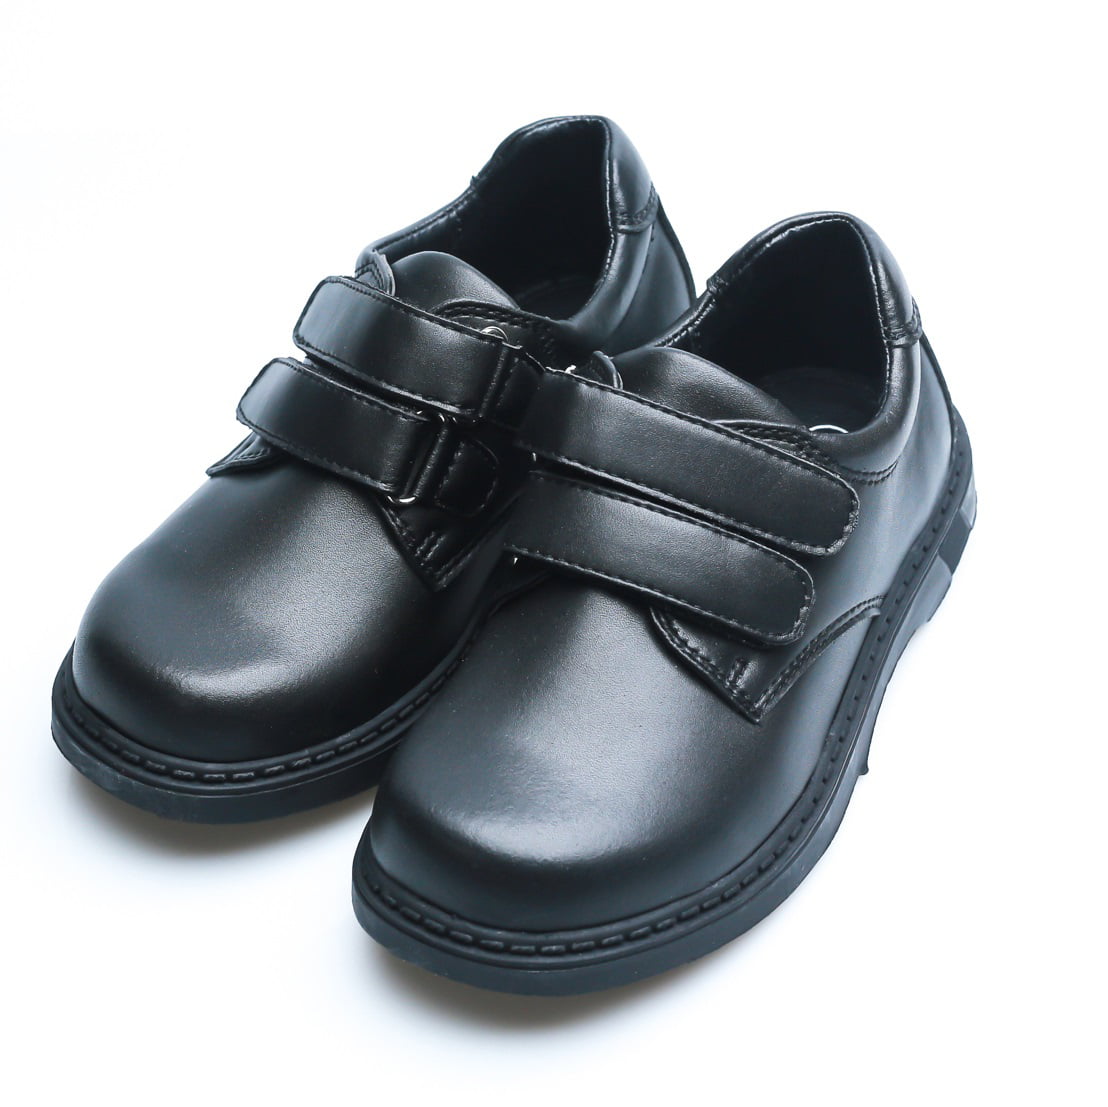 good black shoes for school